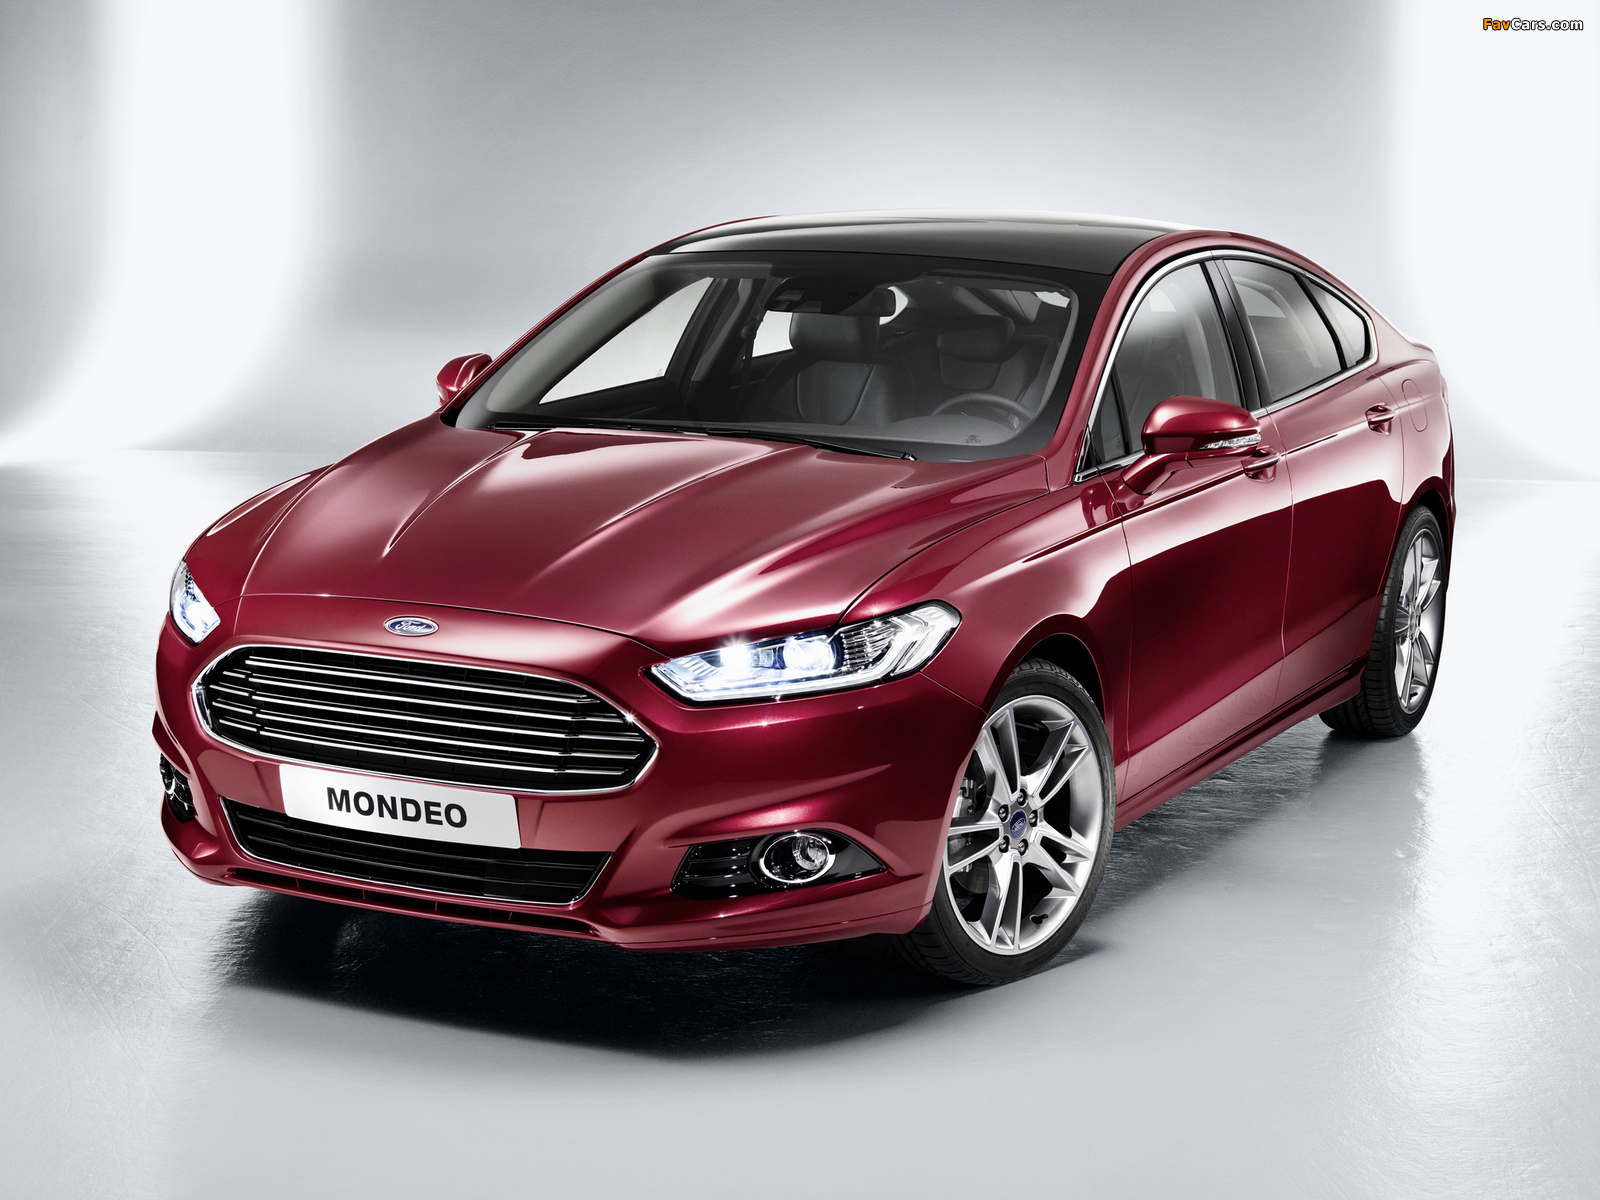 Ford Mondeo Hatchback 2013 pictures (1600 x 1200)